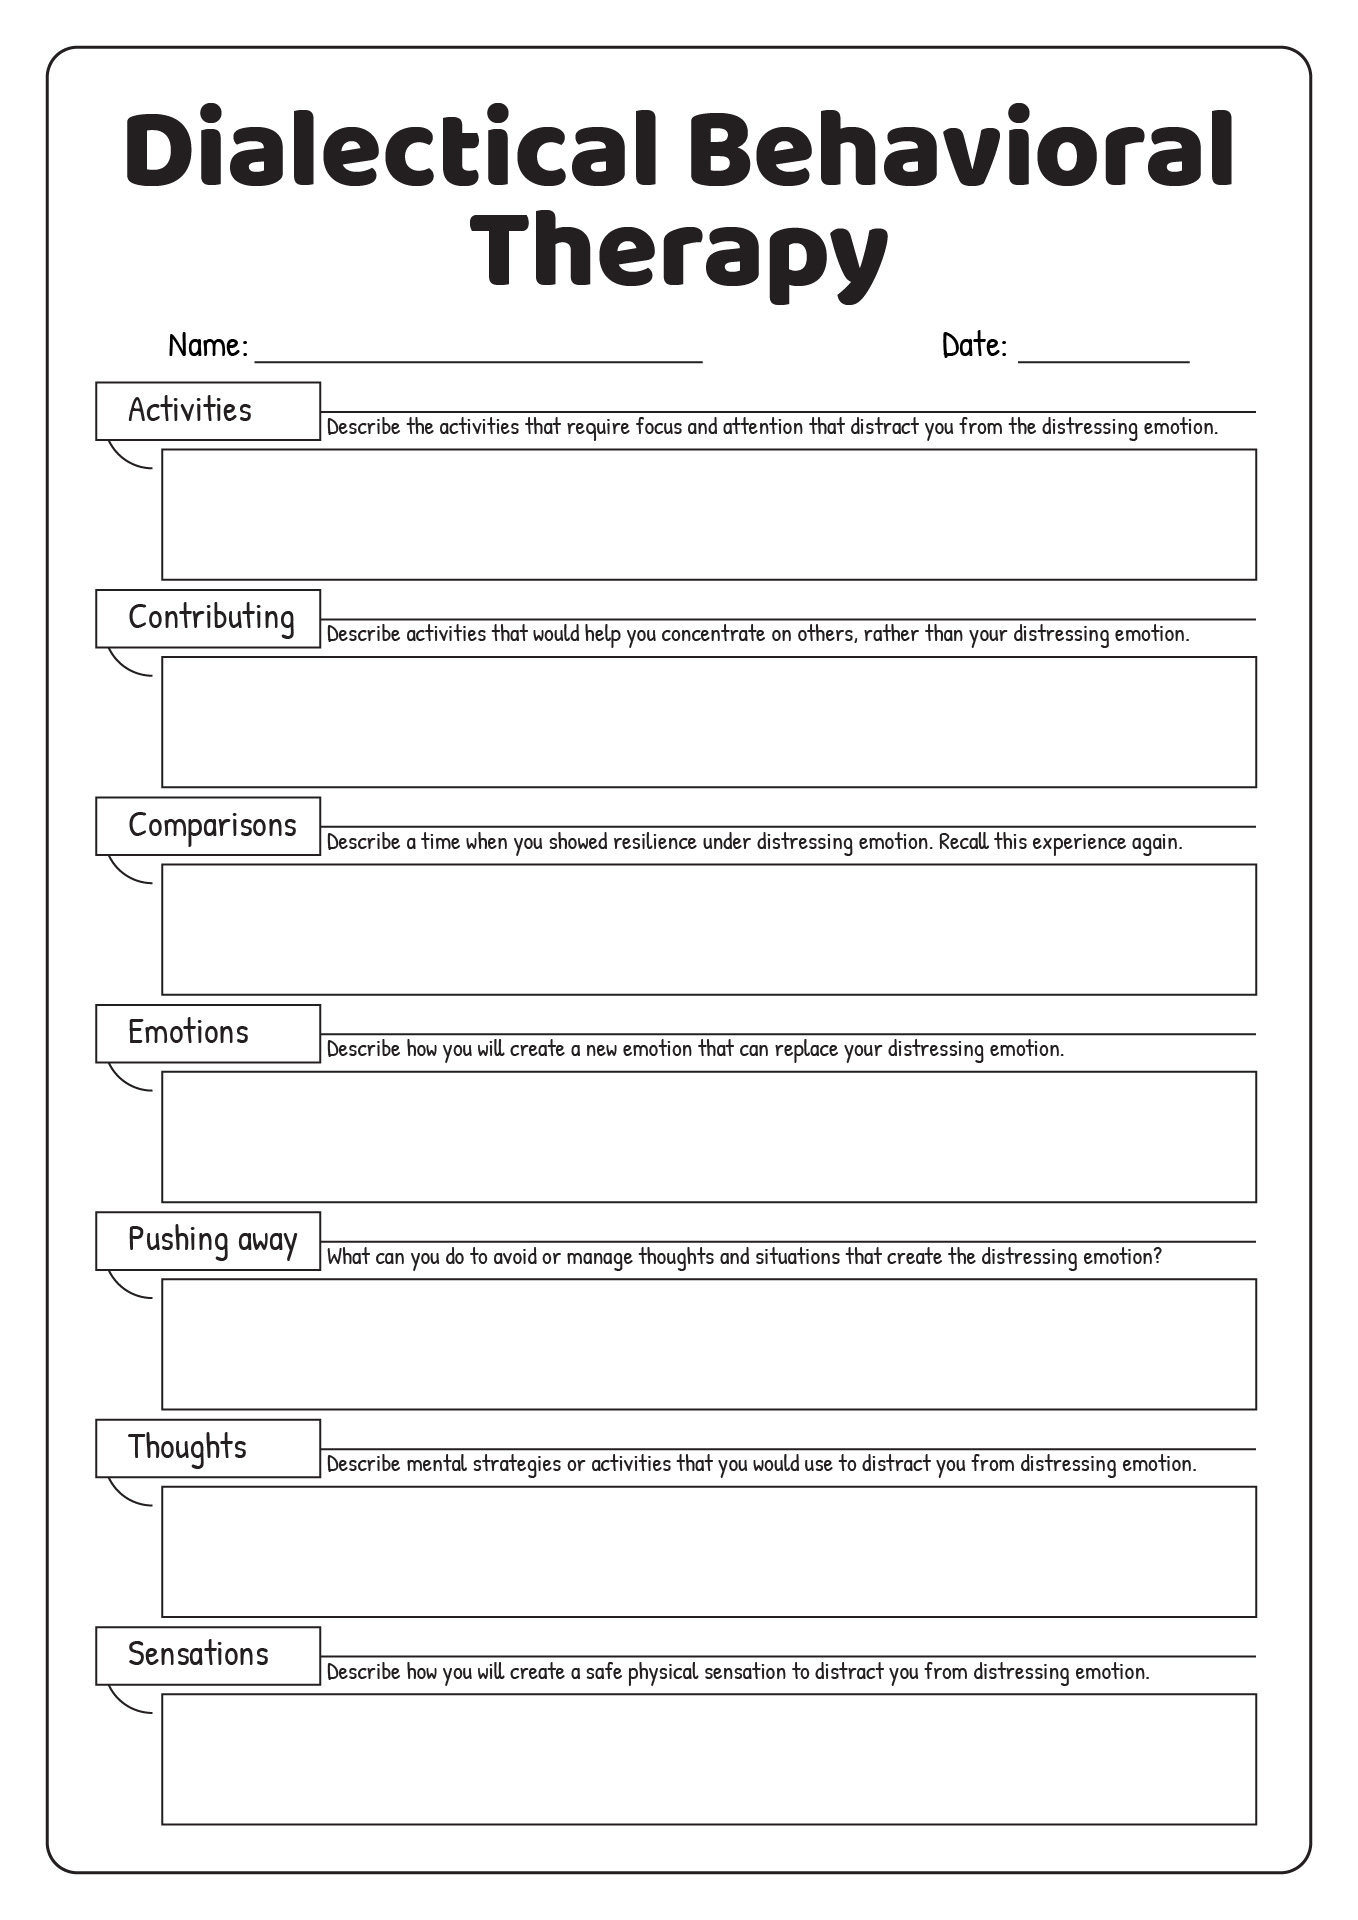 Dialectical Behavioral Therapy Worksheets